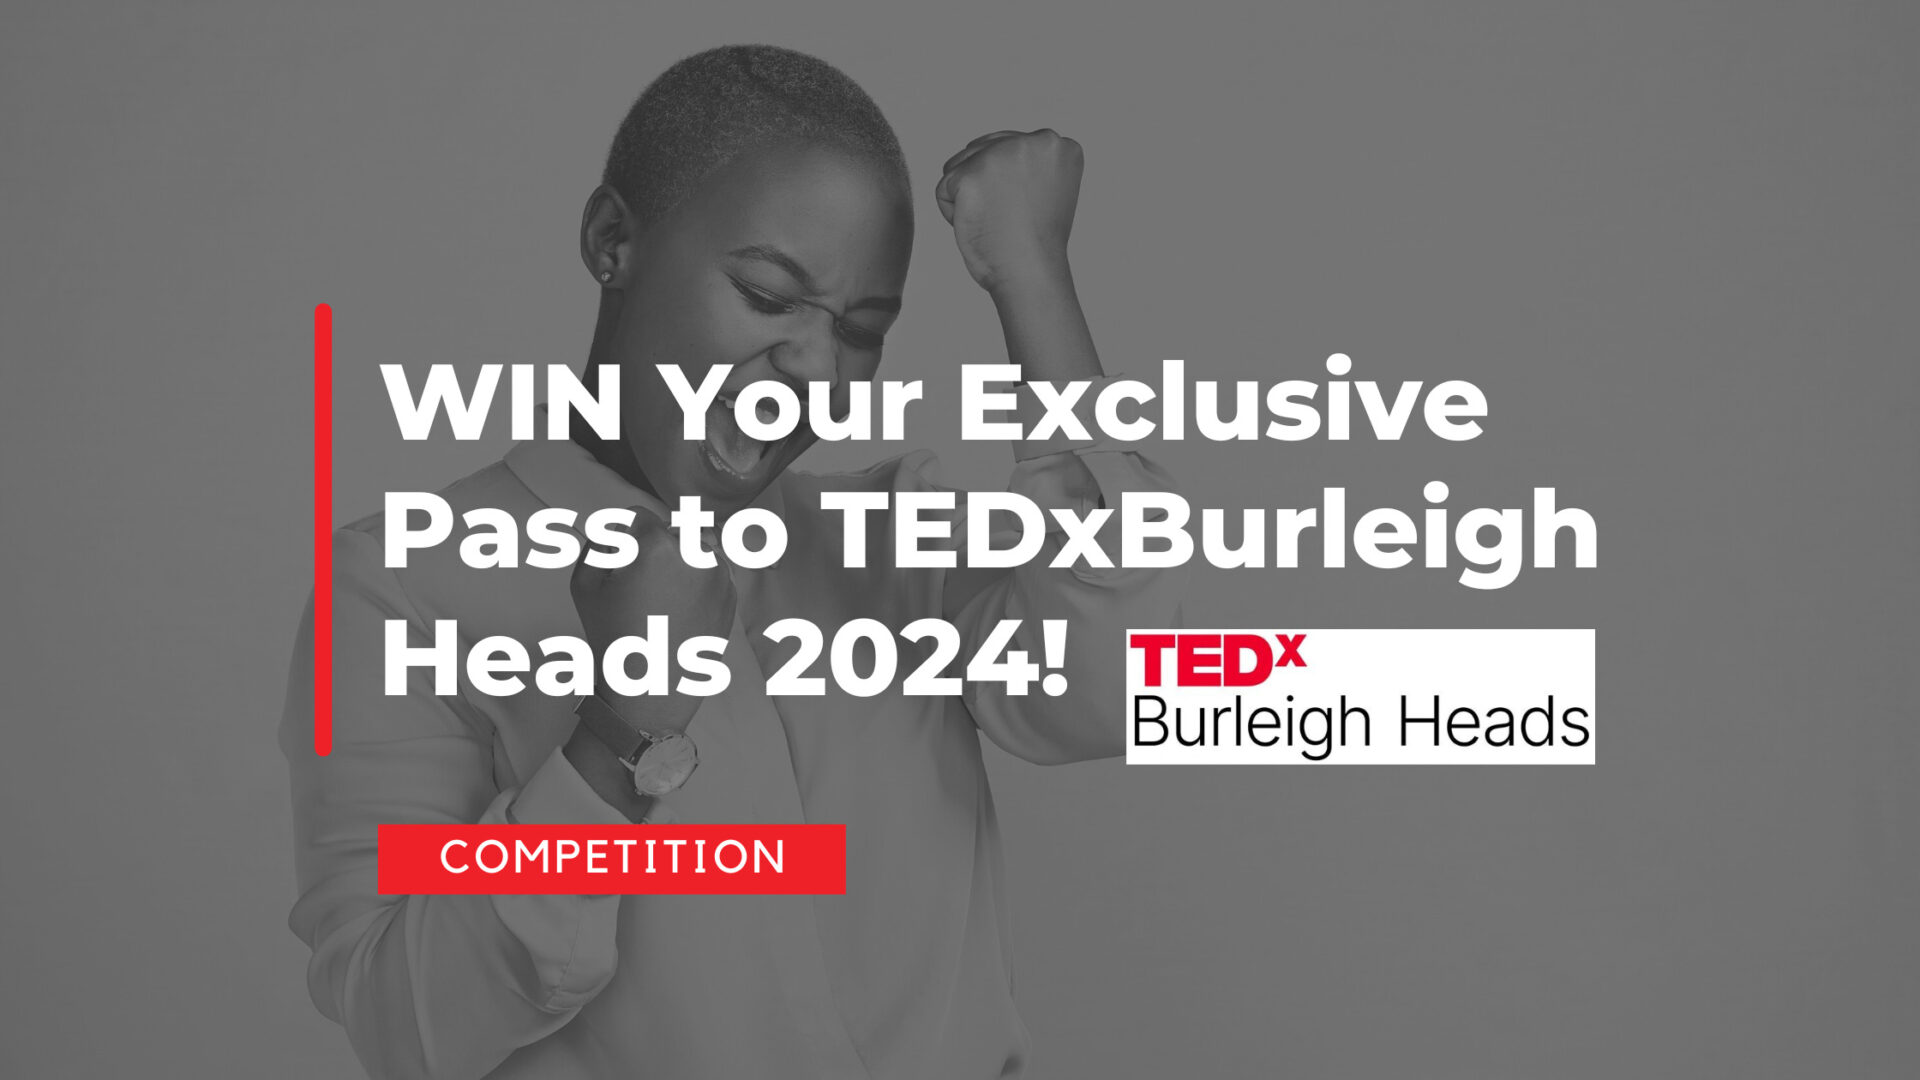 Win Your Exclusive Pass to TEDxBurleigh Heads 2024!